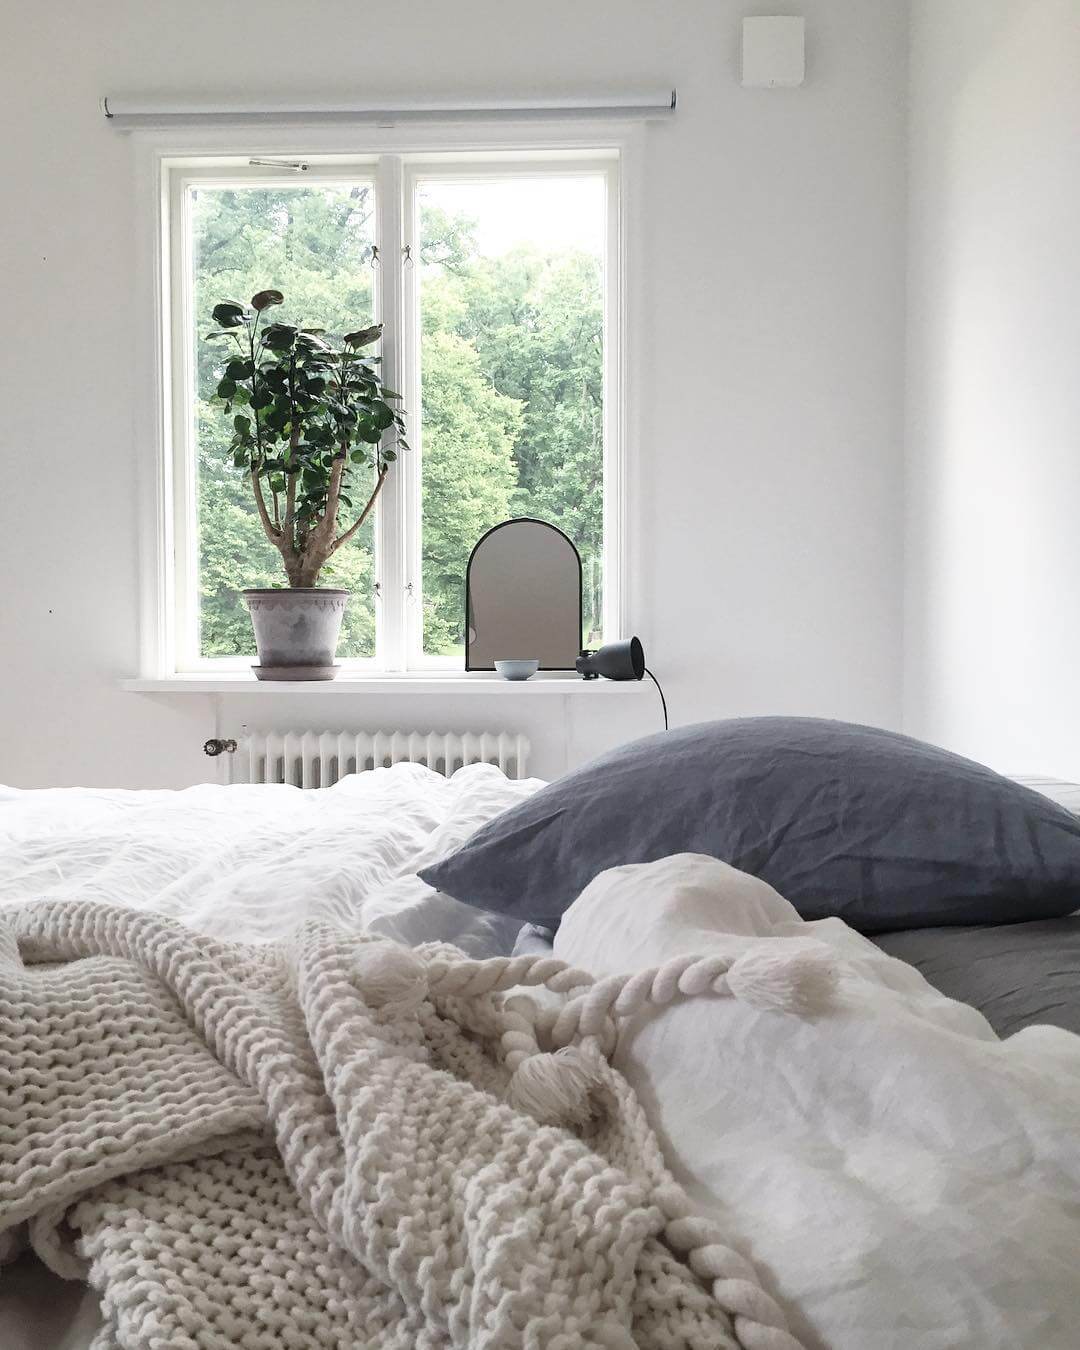 Turn your bedroom into a self-care haven with these really simple tricks on www.lovetohome.co.uk Image credit: @creamandnavy via Instagram